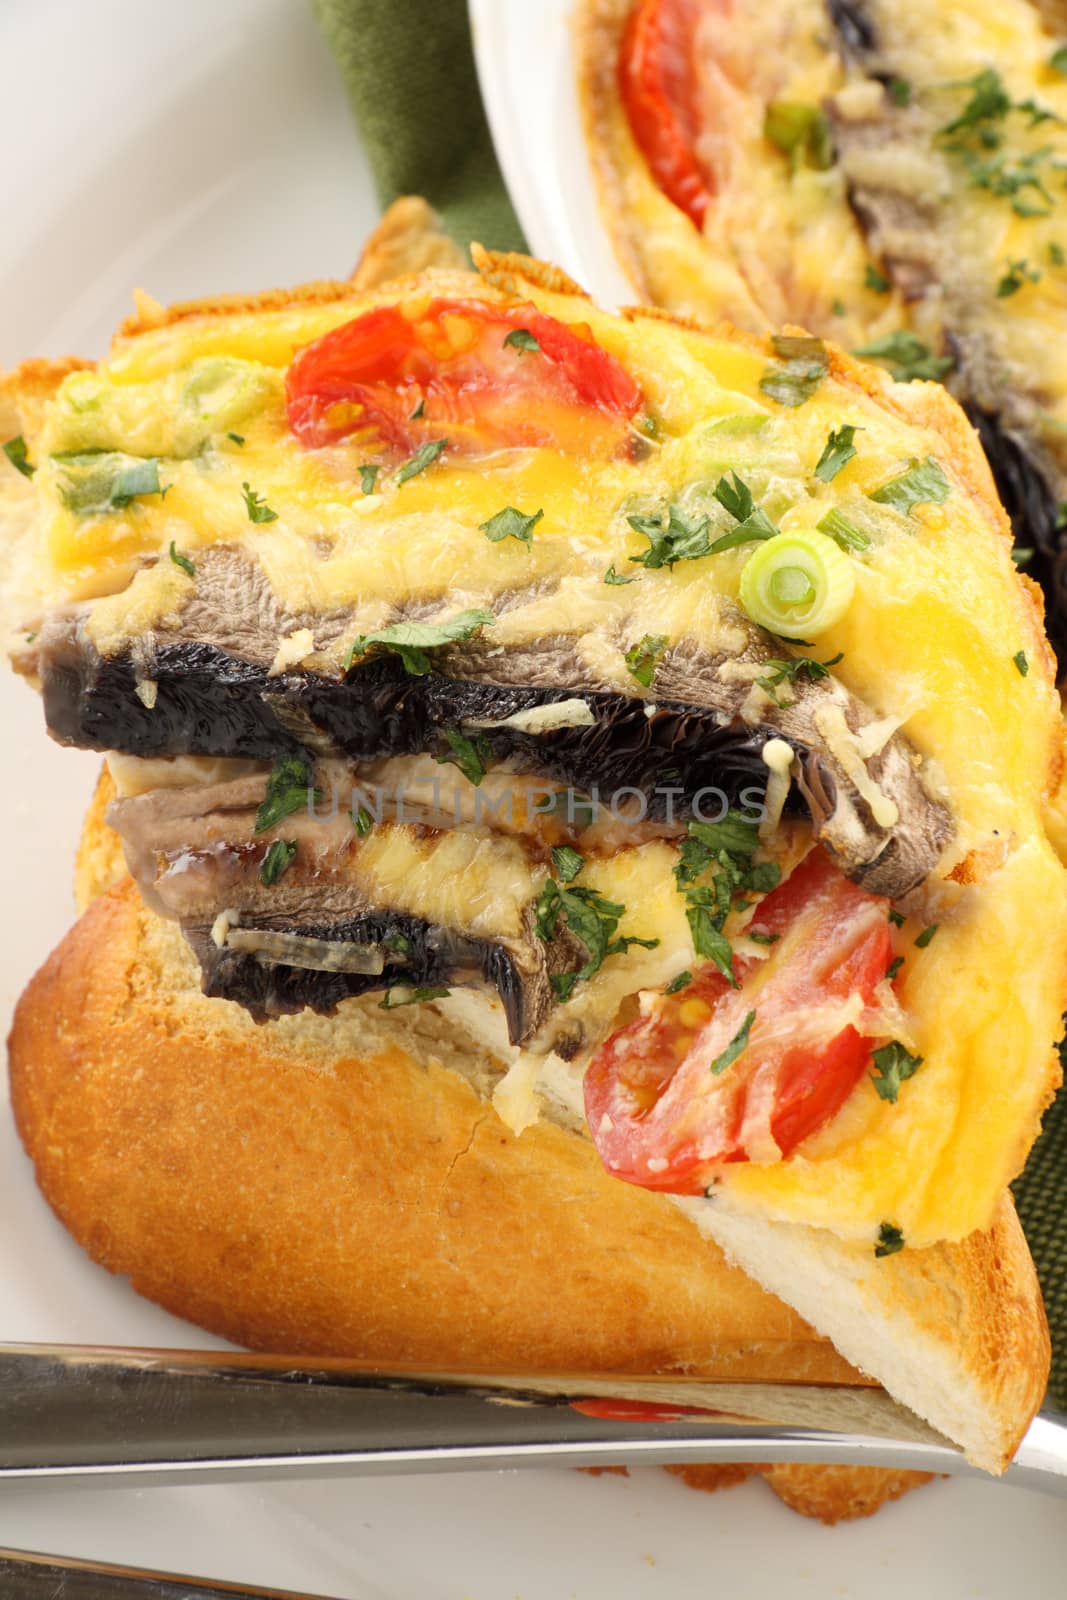 Delicious mushroom and tomato bake served on toast for breakfast.